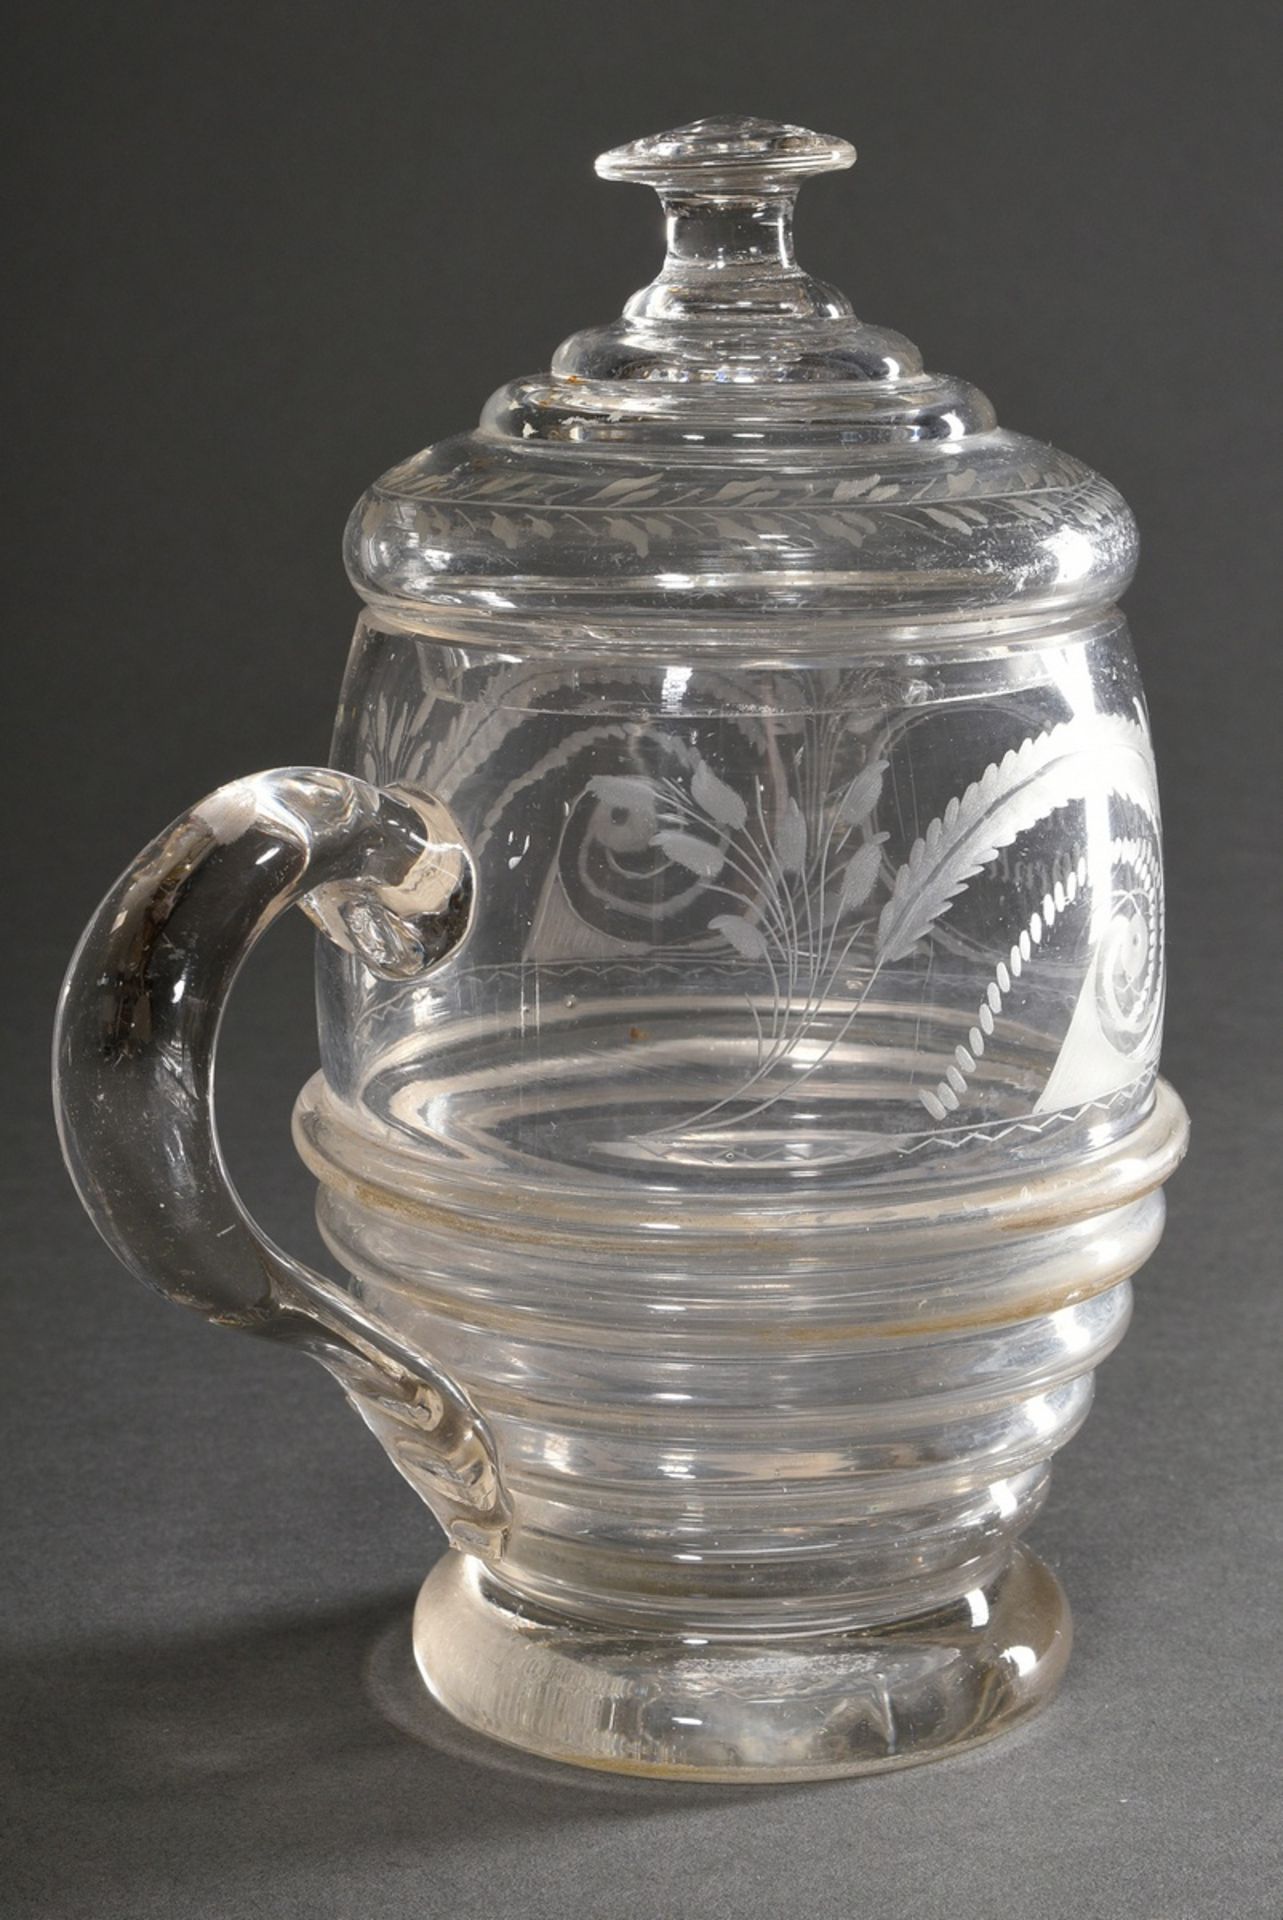 Biedermeier glass tankard with floral cut and cartouche ‘Zum Andenken’ on a barrel-shaped body blow - Image 2 of 8